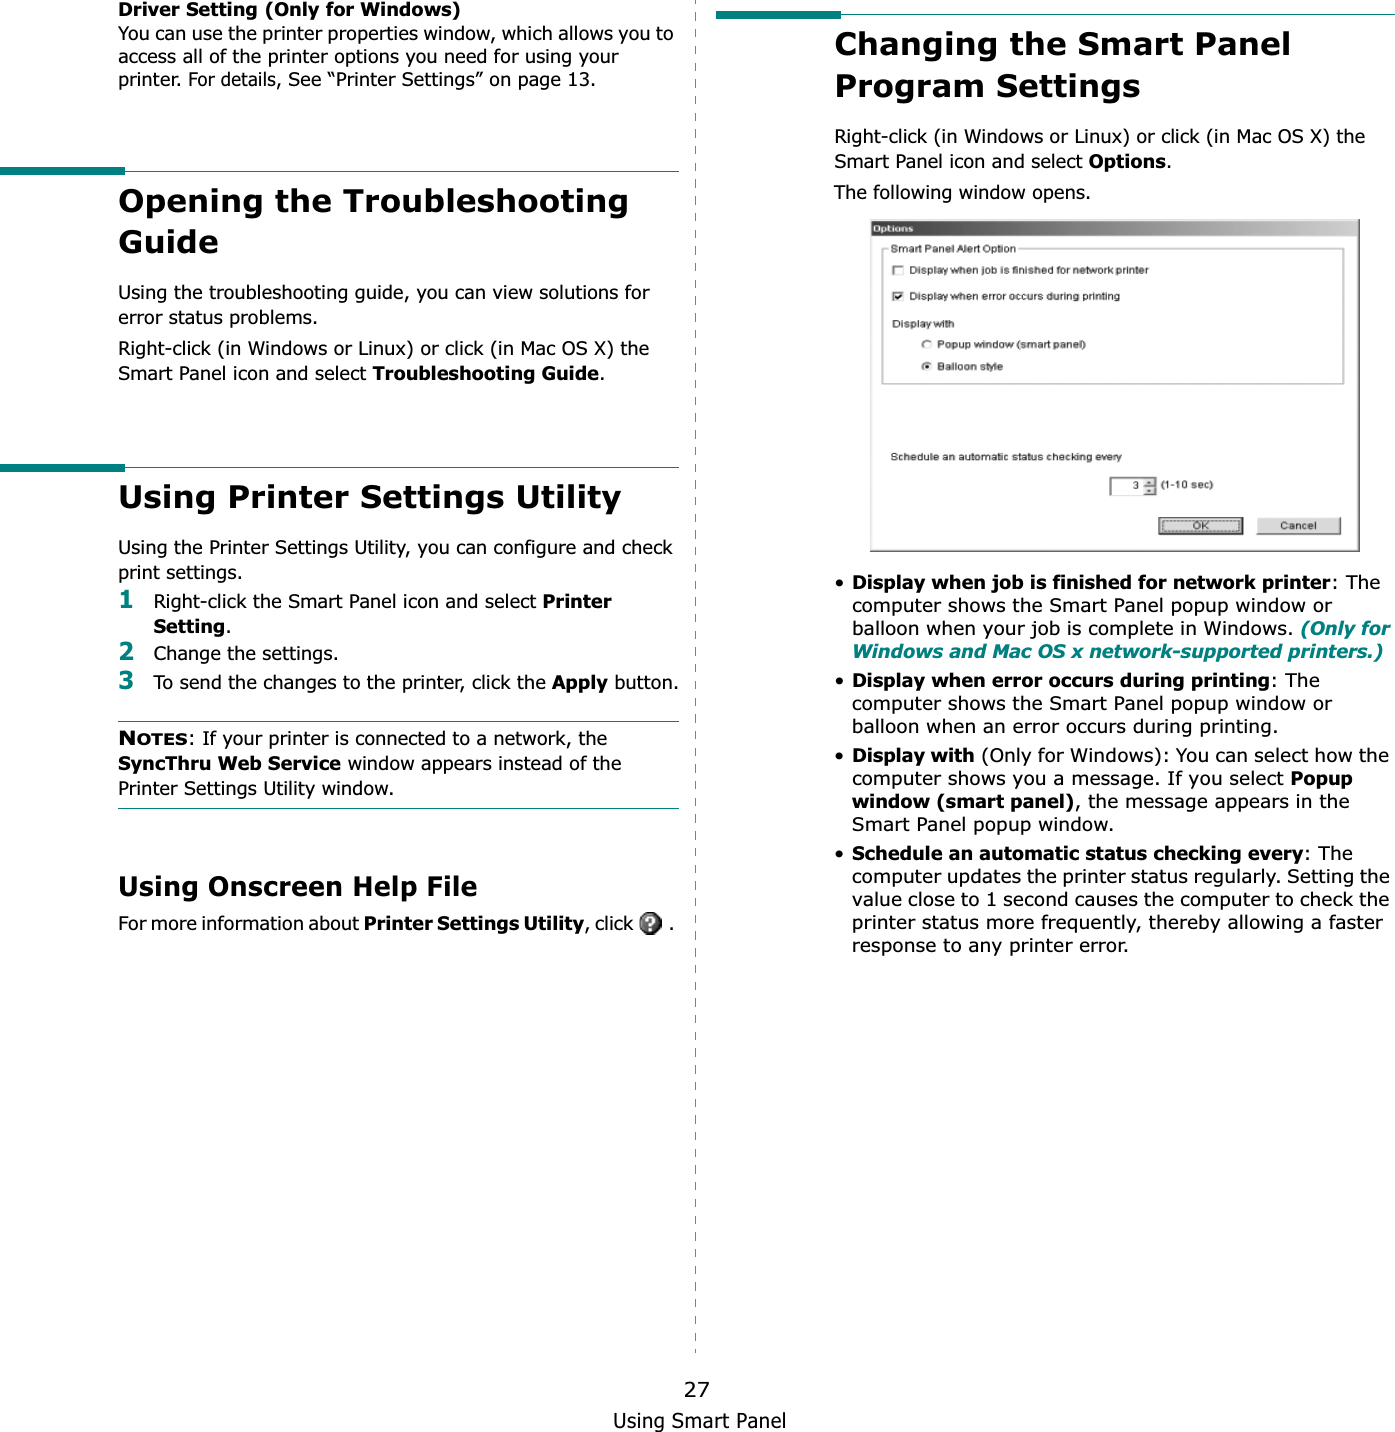 Using Smart Panel27Driver Setting (Only for Windows)You can use the printer properties window, which allows you to access all of the printer options you need for using your printer. For details, See “Printer Settings” on page 13.Opening the Troubleshooting GuideUsing the troubleshooting guide, you can view solutions for error status problems.Right-click (in Windows or Linux) or click (in Mac OS X) the Smart Panel icon and select Troubleshooting Guide.Using Printer Settings UtilityUsing the Printer Settings Utility, you can configure and check print settings. 1Right-click the Smart Panel icon and select Printer Setting.2Change the settings. 3To send the changes to the printer, click the Apply button.NOTES: If your printer is connected to a network, the SyncThru Web Service window appears instead of the Printer Settings Utility window.Using Onscreen Help FileFor more information about Printer Settings Utility, click   . Changing the Smart Panel Program SettingsRight-click (in Windows or Linux) or click (in Mac OS X) the Smart Panel icon and select Options.The following window opens.•Display when job is finished for network printer: The computer shows the Smart Panel popup window or balloon when your job is complete in Windows. (Only for Windows and Mac OS x network-supported printers.)•Display when error occurs during printing: The computer shows the Smart Panel popup window or balloon when an error occurs during printing.•Display with (Only for Windows): You can select how the computer shows you a message. If you select Popup window (smart panel), the message appears in the Smart Panel popup window.•Schedule an automatic status checking every: The computer updates the printer status regularly. Setting the value close to 1 second causes the computer to check the printer status more frequently, thereby allowing a faster response to any printer error.